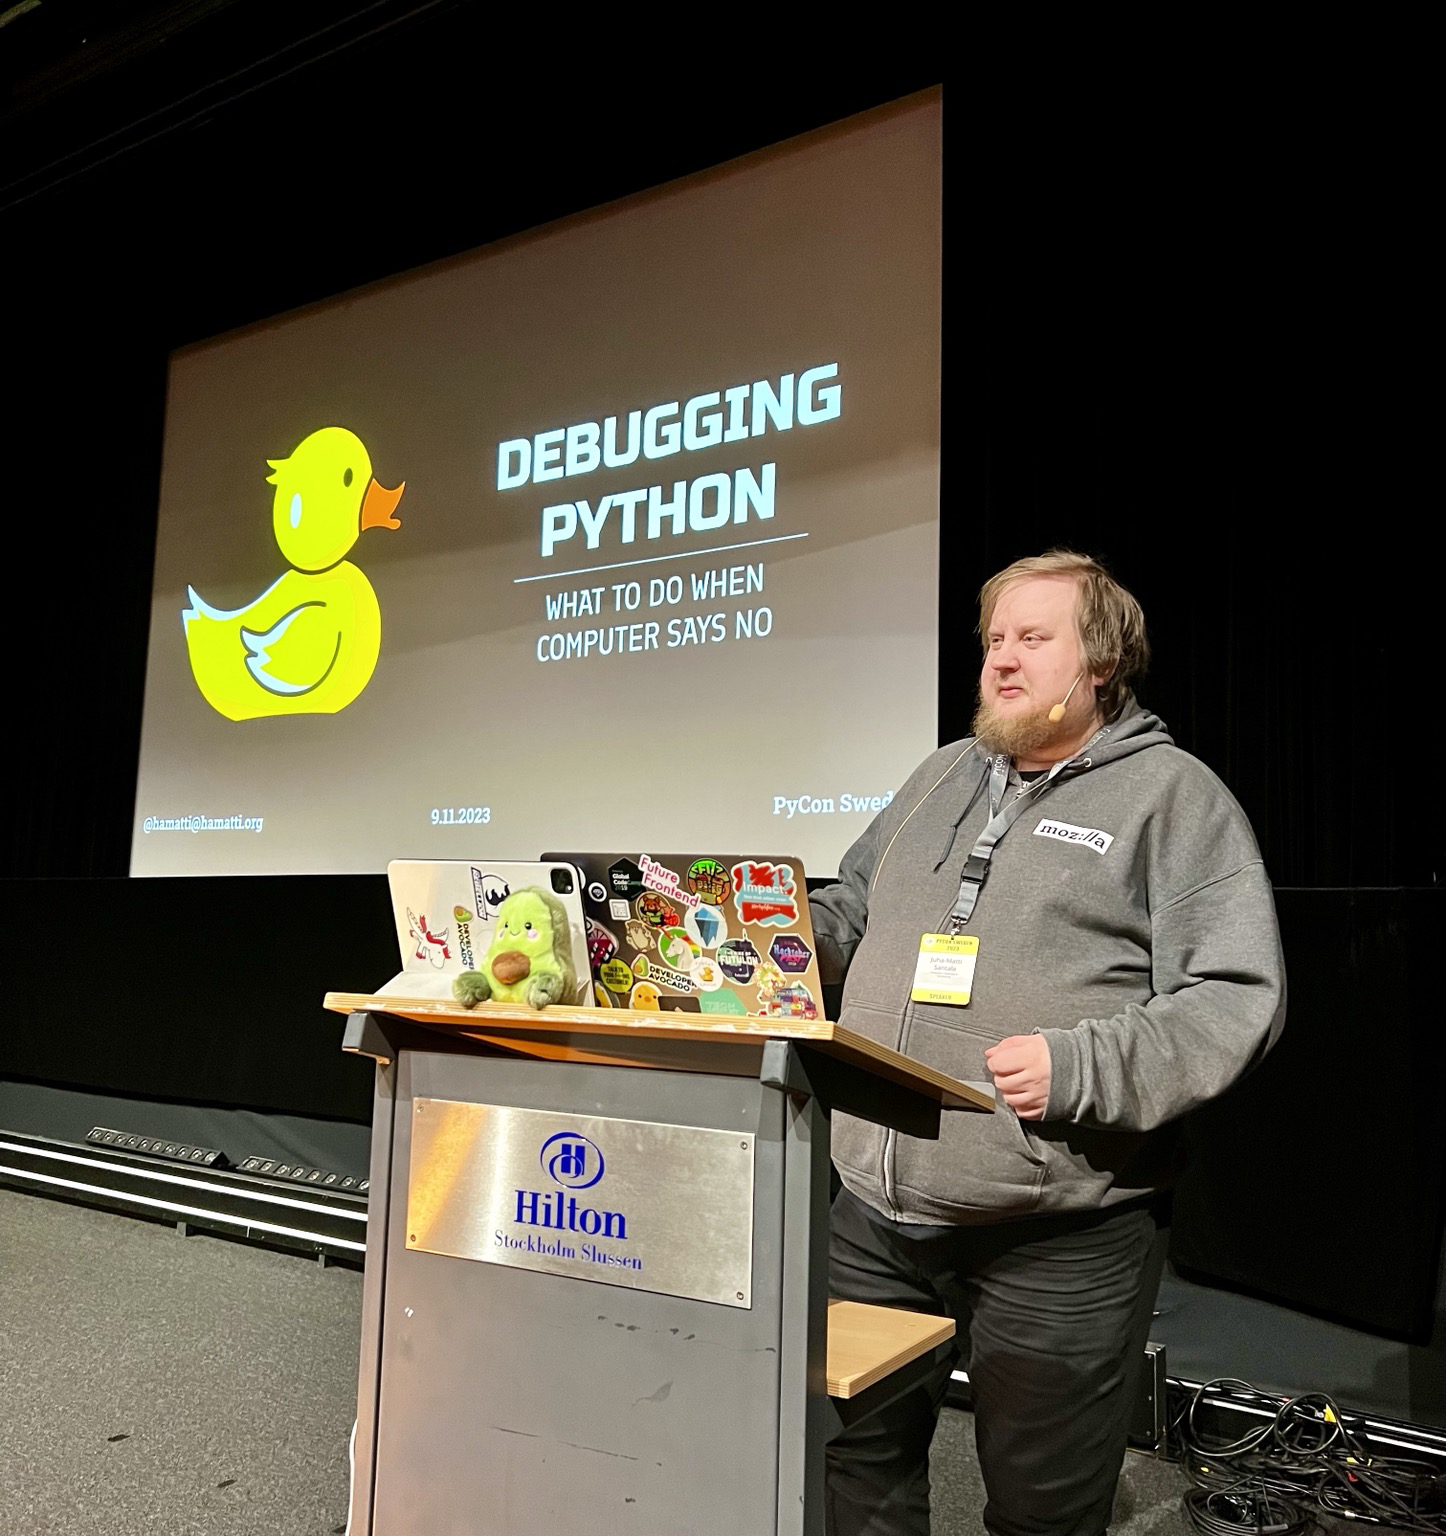 Juhis on stage standing behind a speaker podium. On the podium, there's a laptop, an iPad and a cute avocado plushie. Juhis is wearing a grey hoodie and black jeans. On the background, a projector screen with a slide that has a yellow rubber duck illustration and title "Debugging Python - what to do when computer says no".